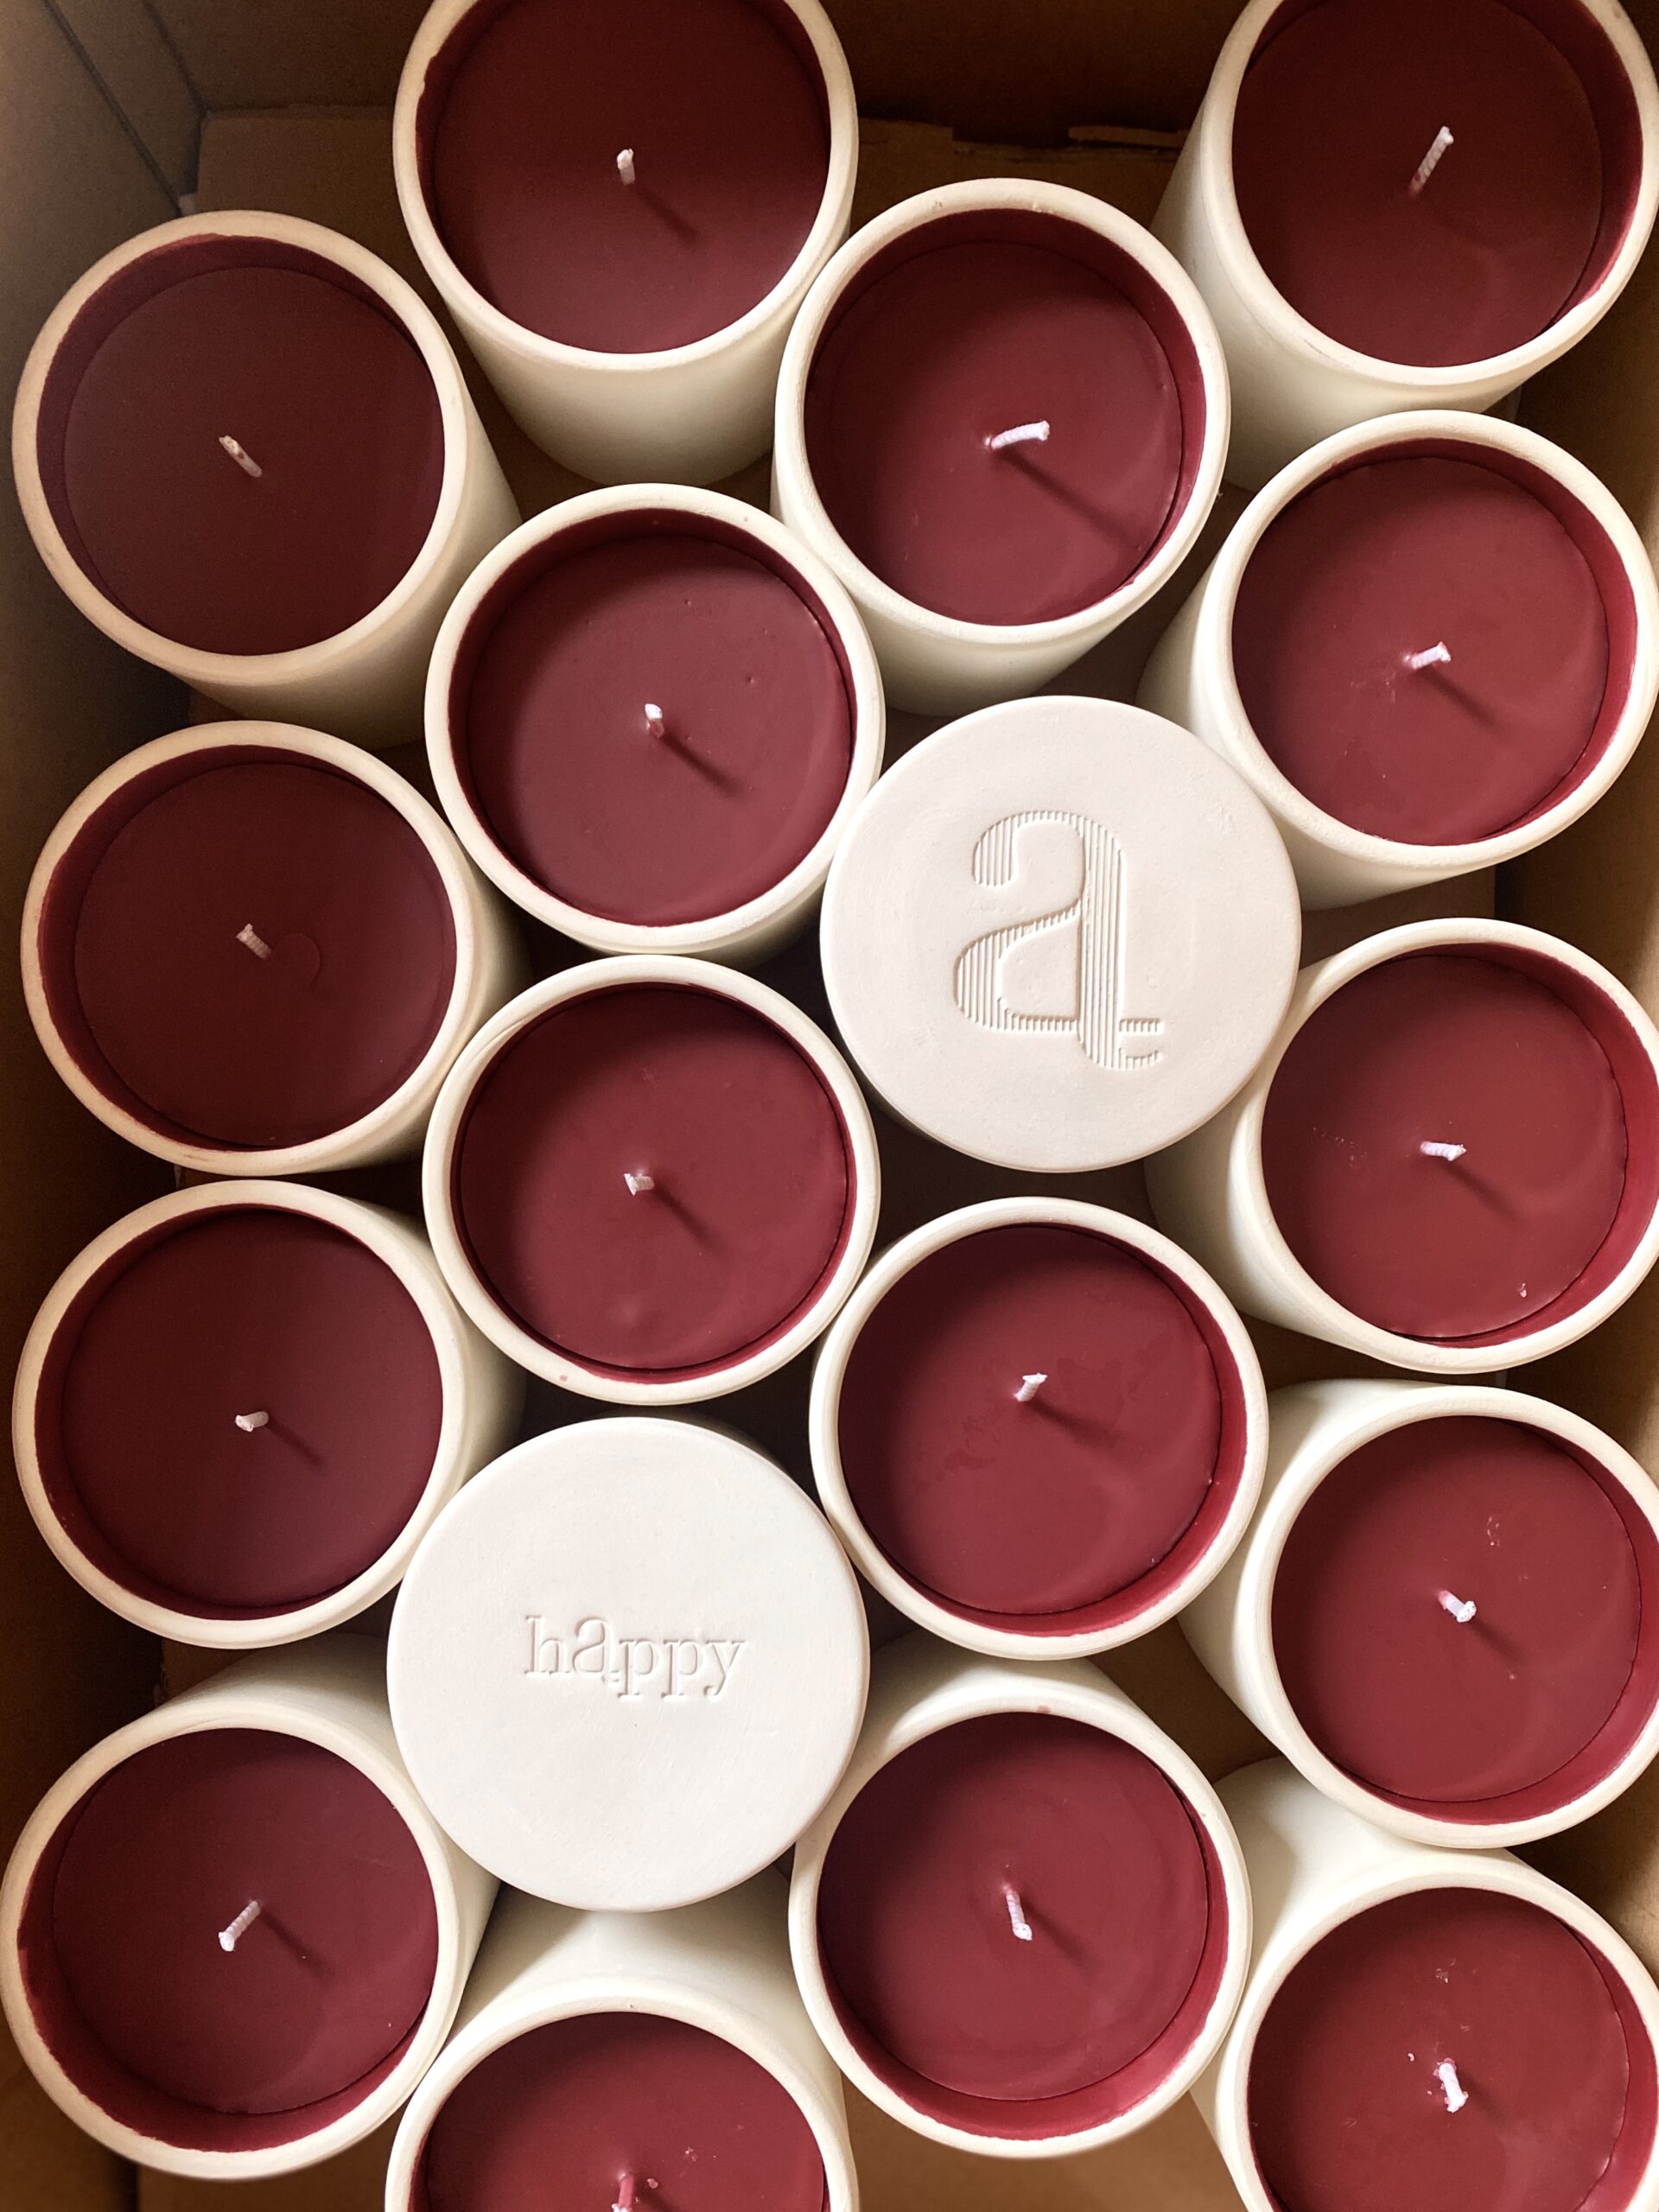 happy-24-special-occasion-handmade-ceramic-soy-blend-burgundi-candle-pumpkin-spice